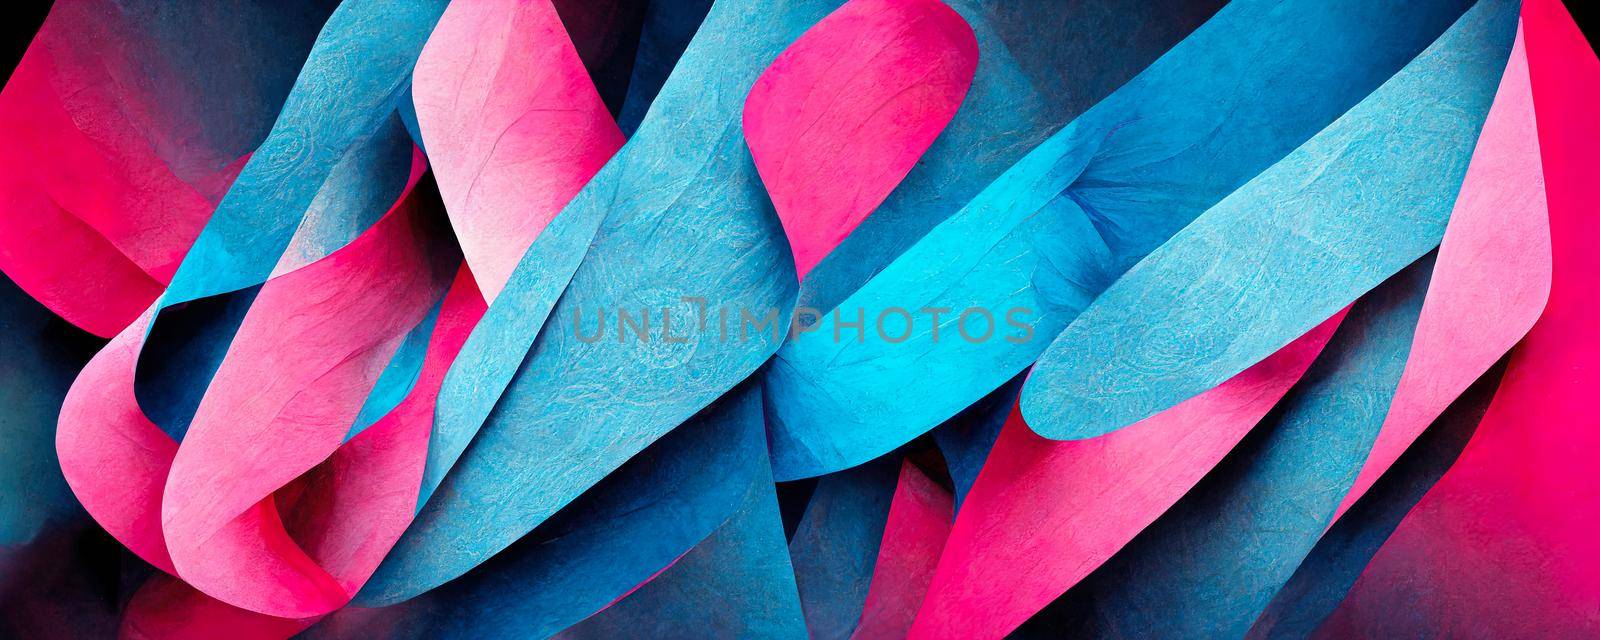 neon paper, Colorful abstract wallpaper texture background illustration by TRMK